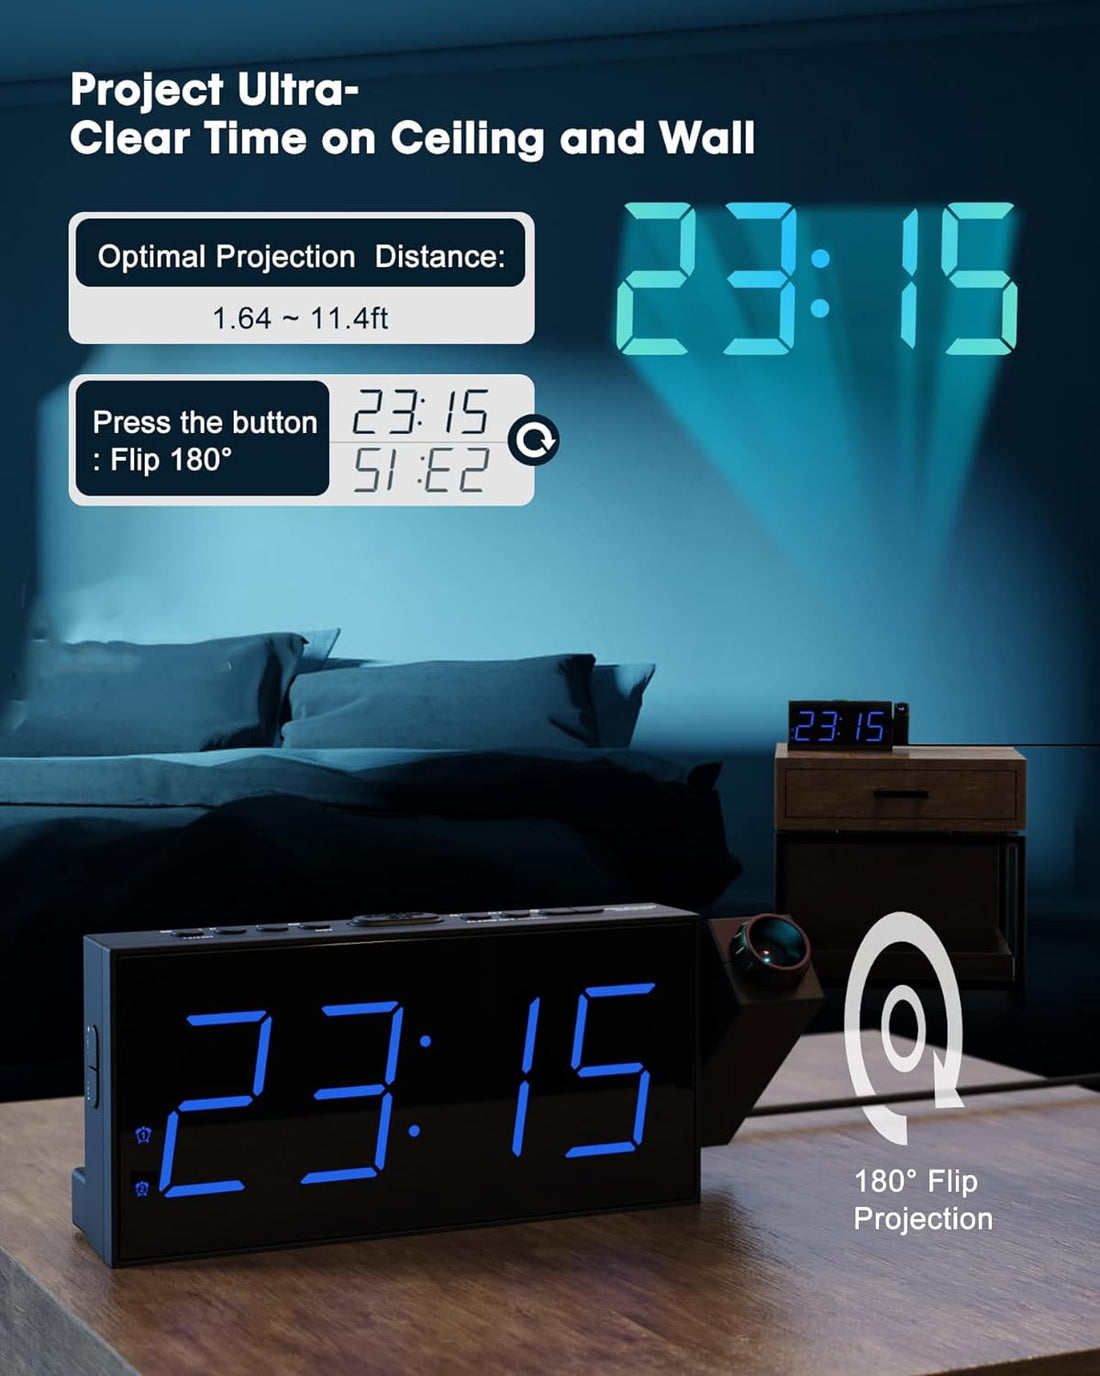 Projection Alarm Clock for Bedroom,LED Digital Clock Projection on Ceiling Wall with USB Phone Charging,Battery Backup,180°Projector& Dimmer,12/24H,DST,Snooze,Dual Loud Bedside Clock for Heavy Sleeper